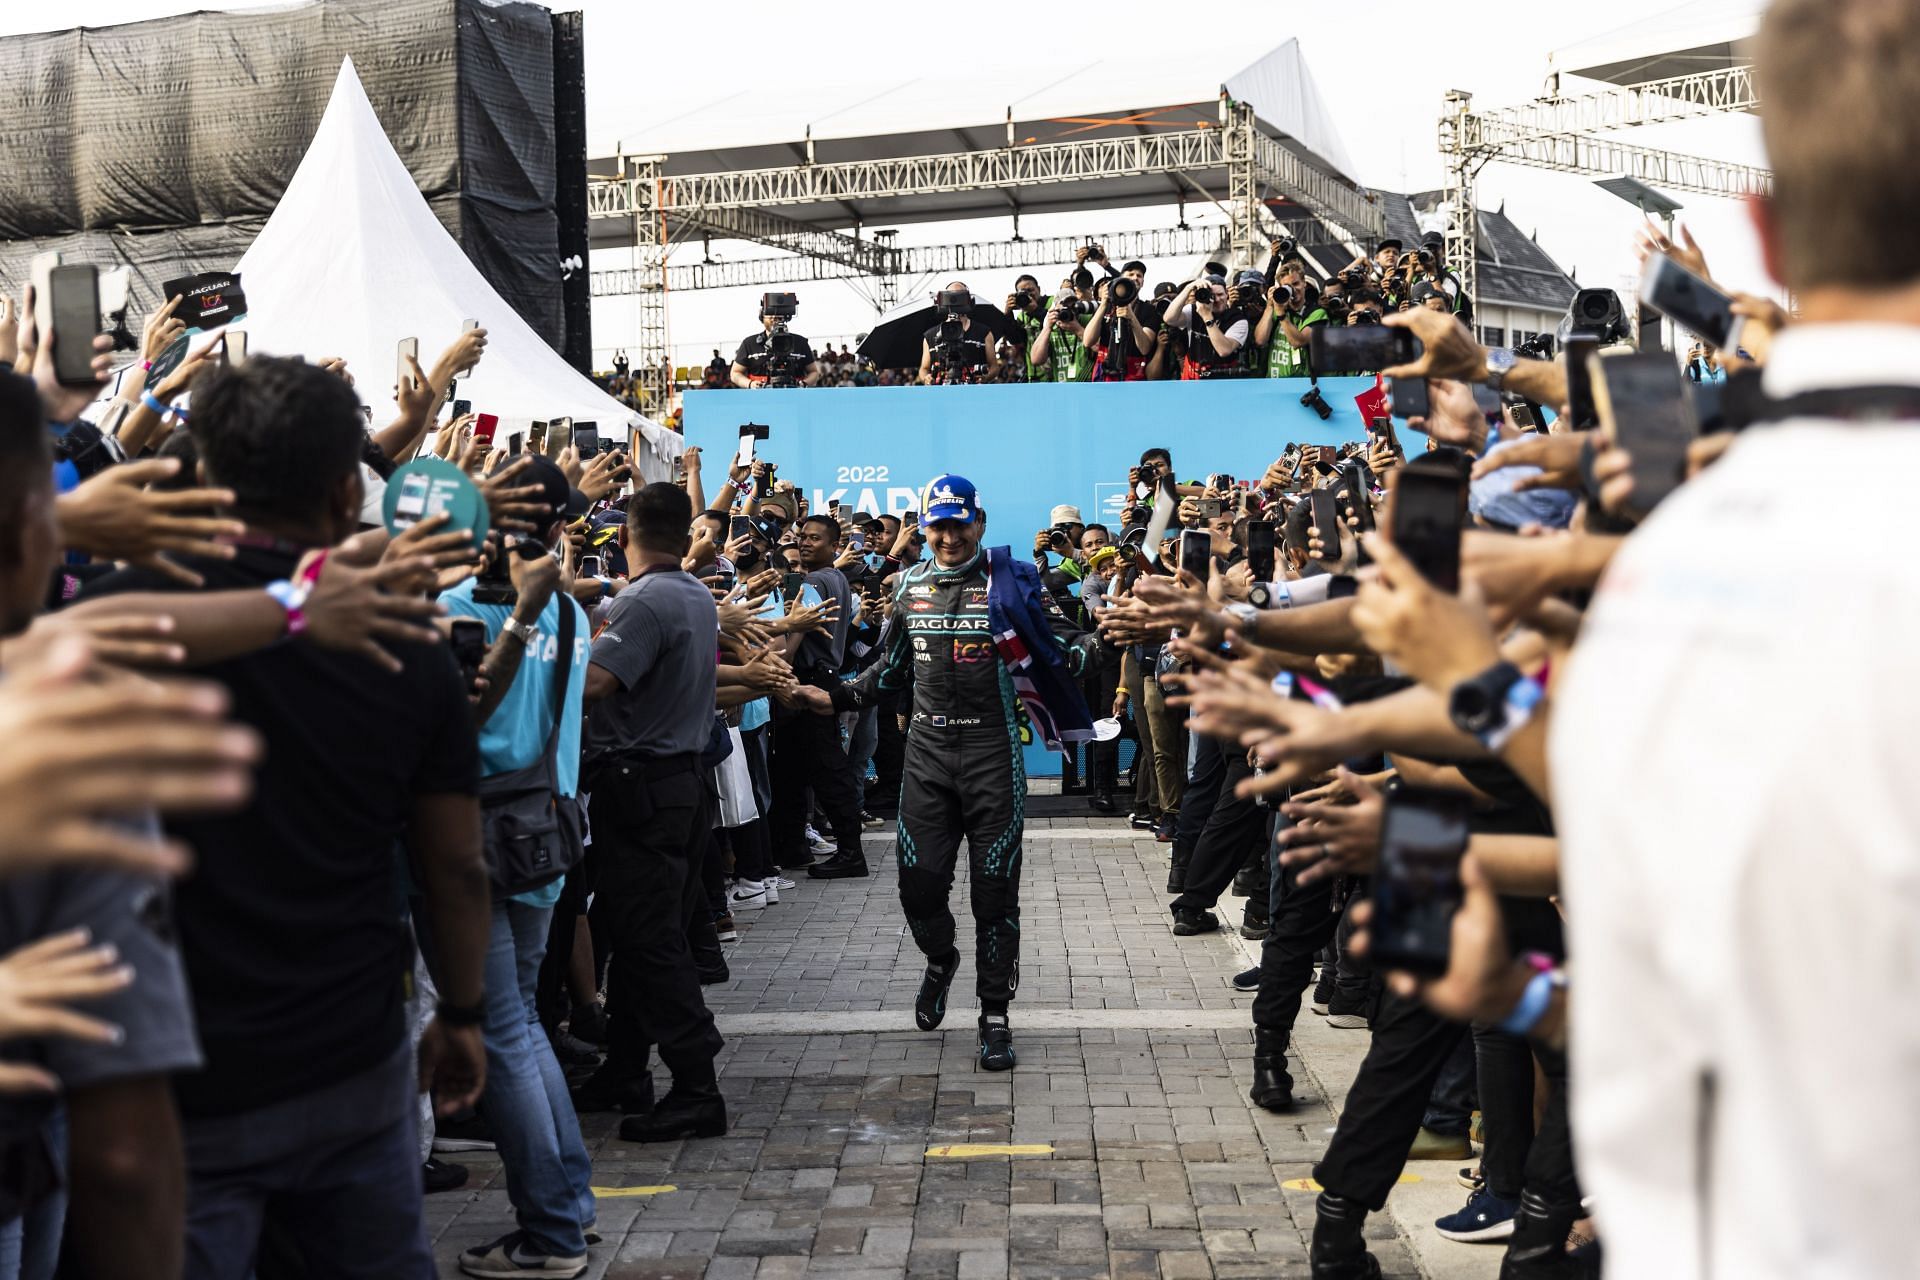 Mitch Evans, Jaguar TCS Racing, celebrates after taking his third career victory at the 2022 Jakarta E-Prix